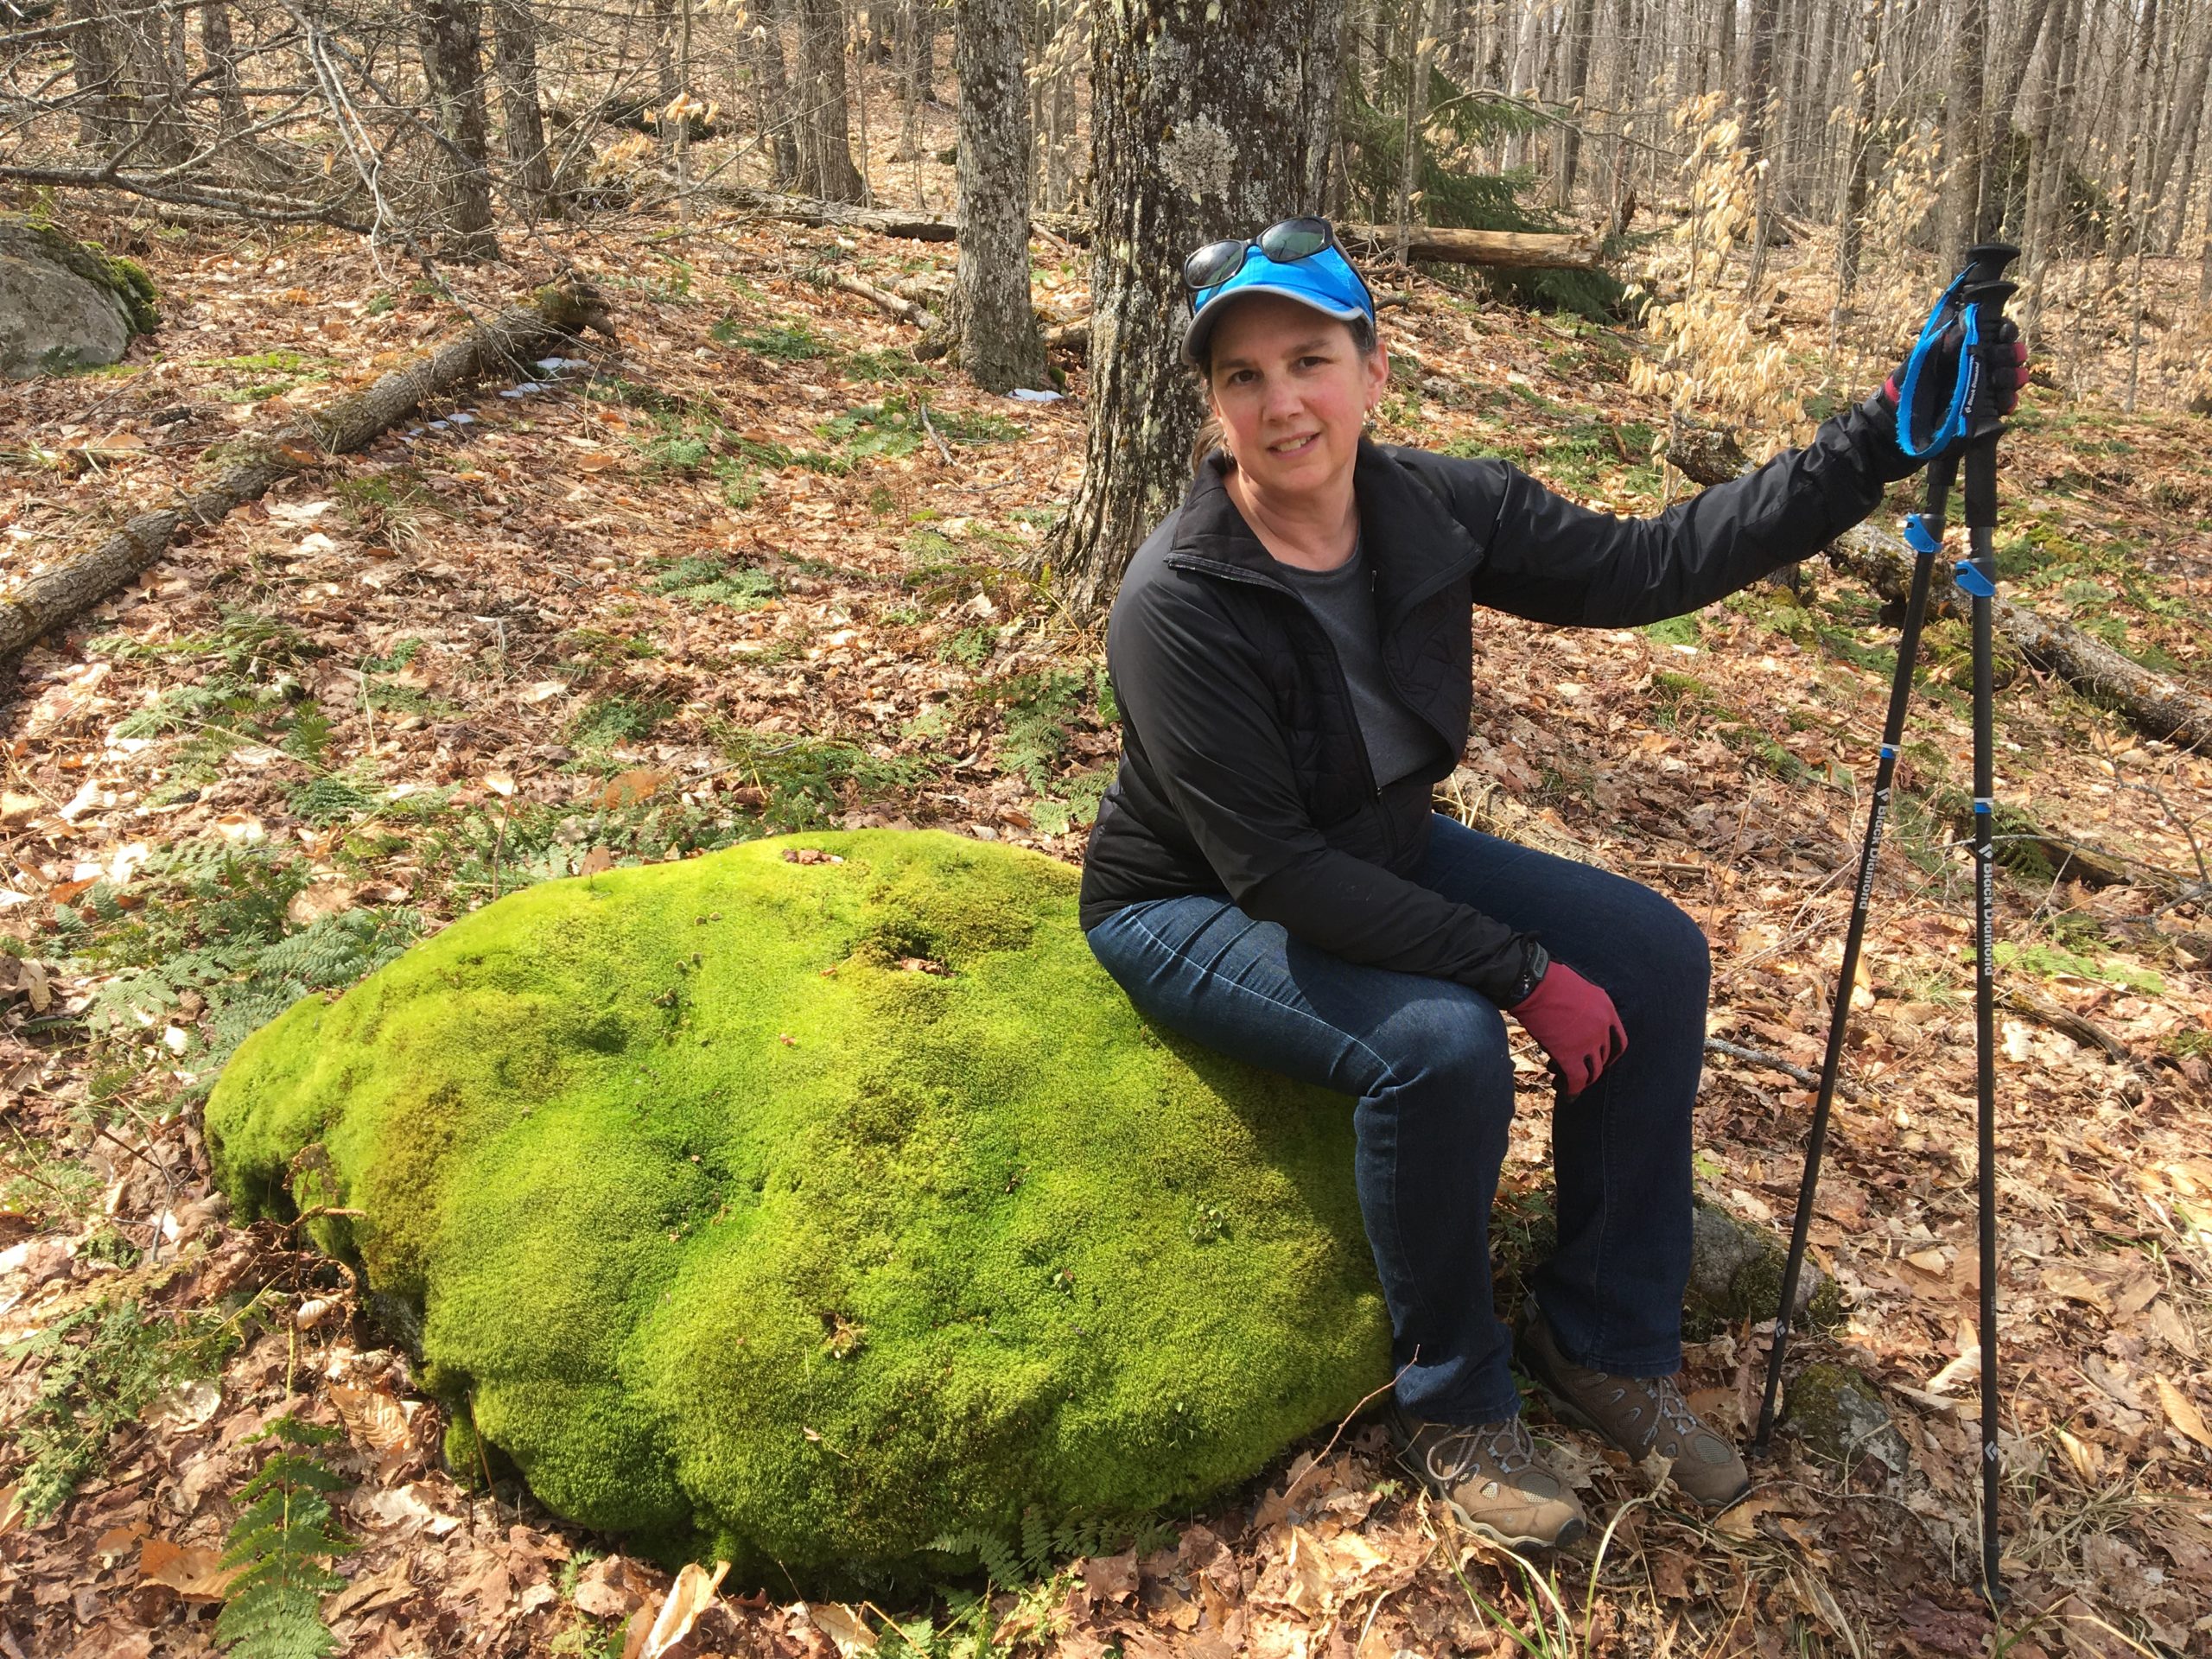 Innkeeper Lisa sitting on a mossy rock during a hike with hiking poles